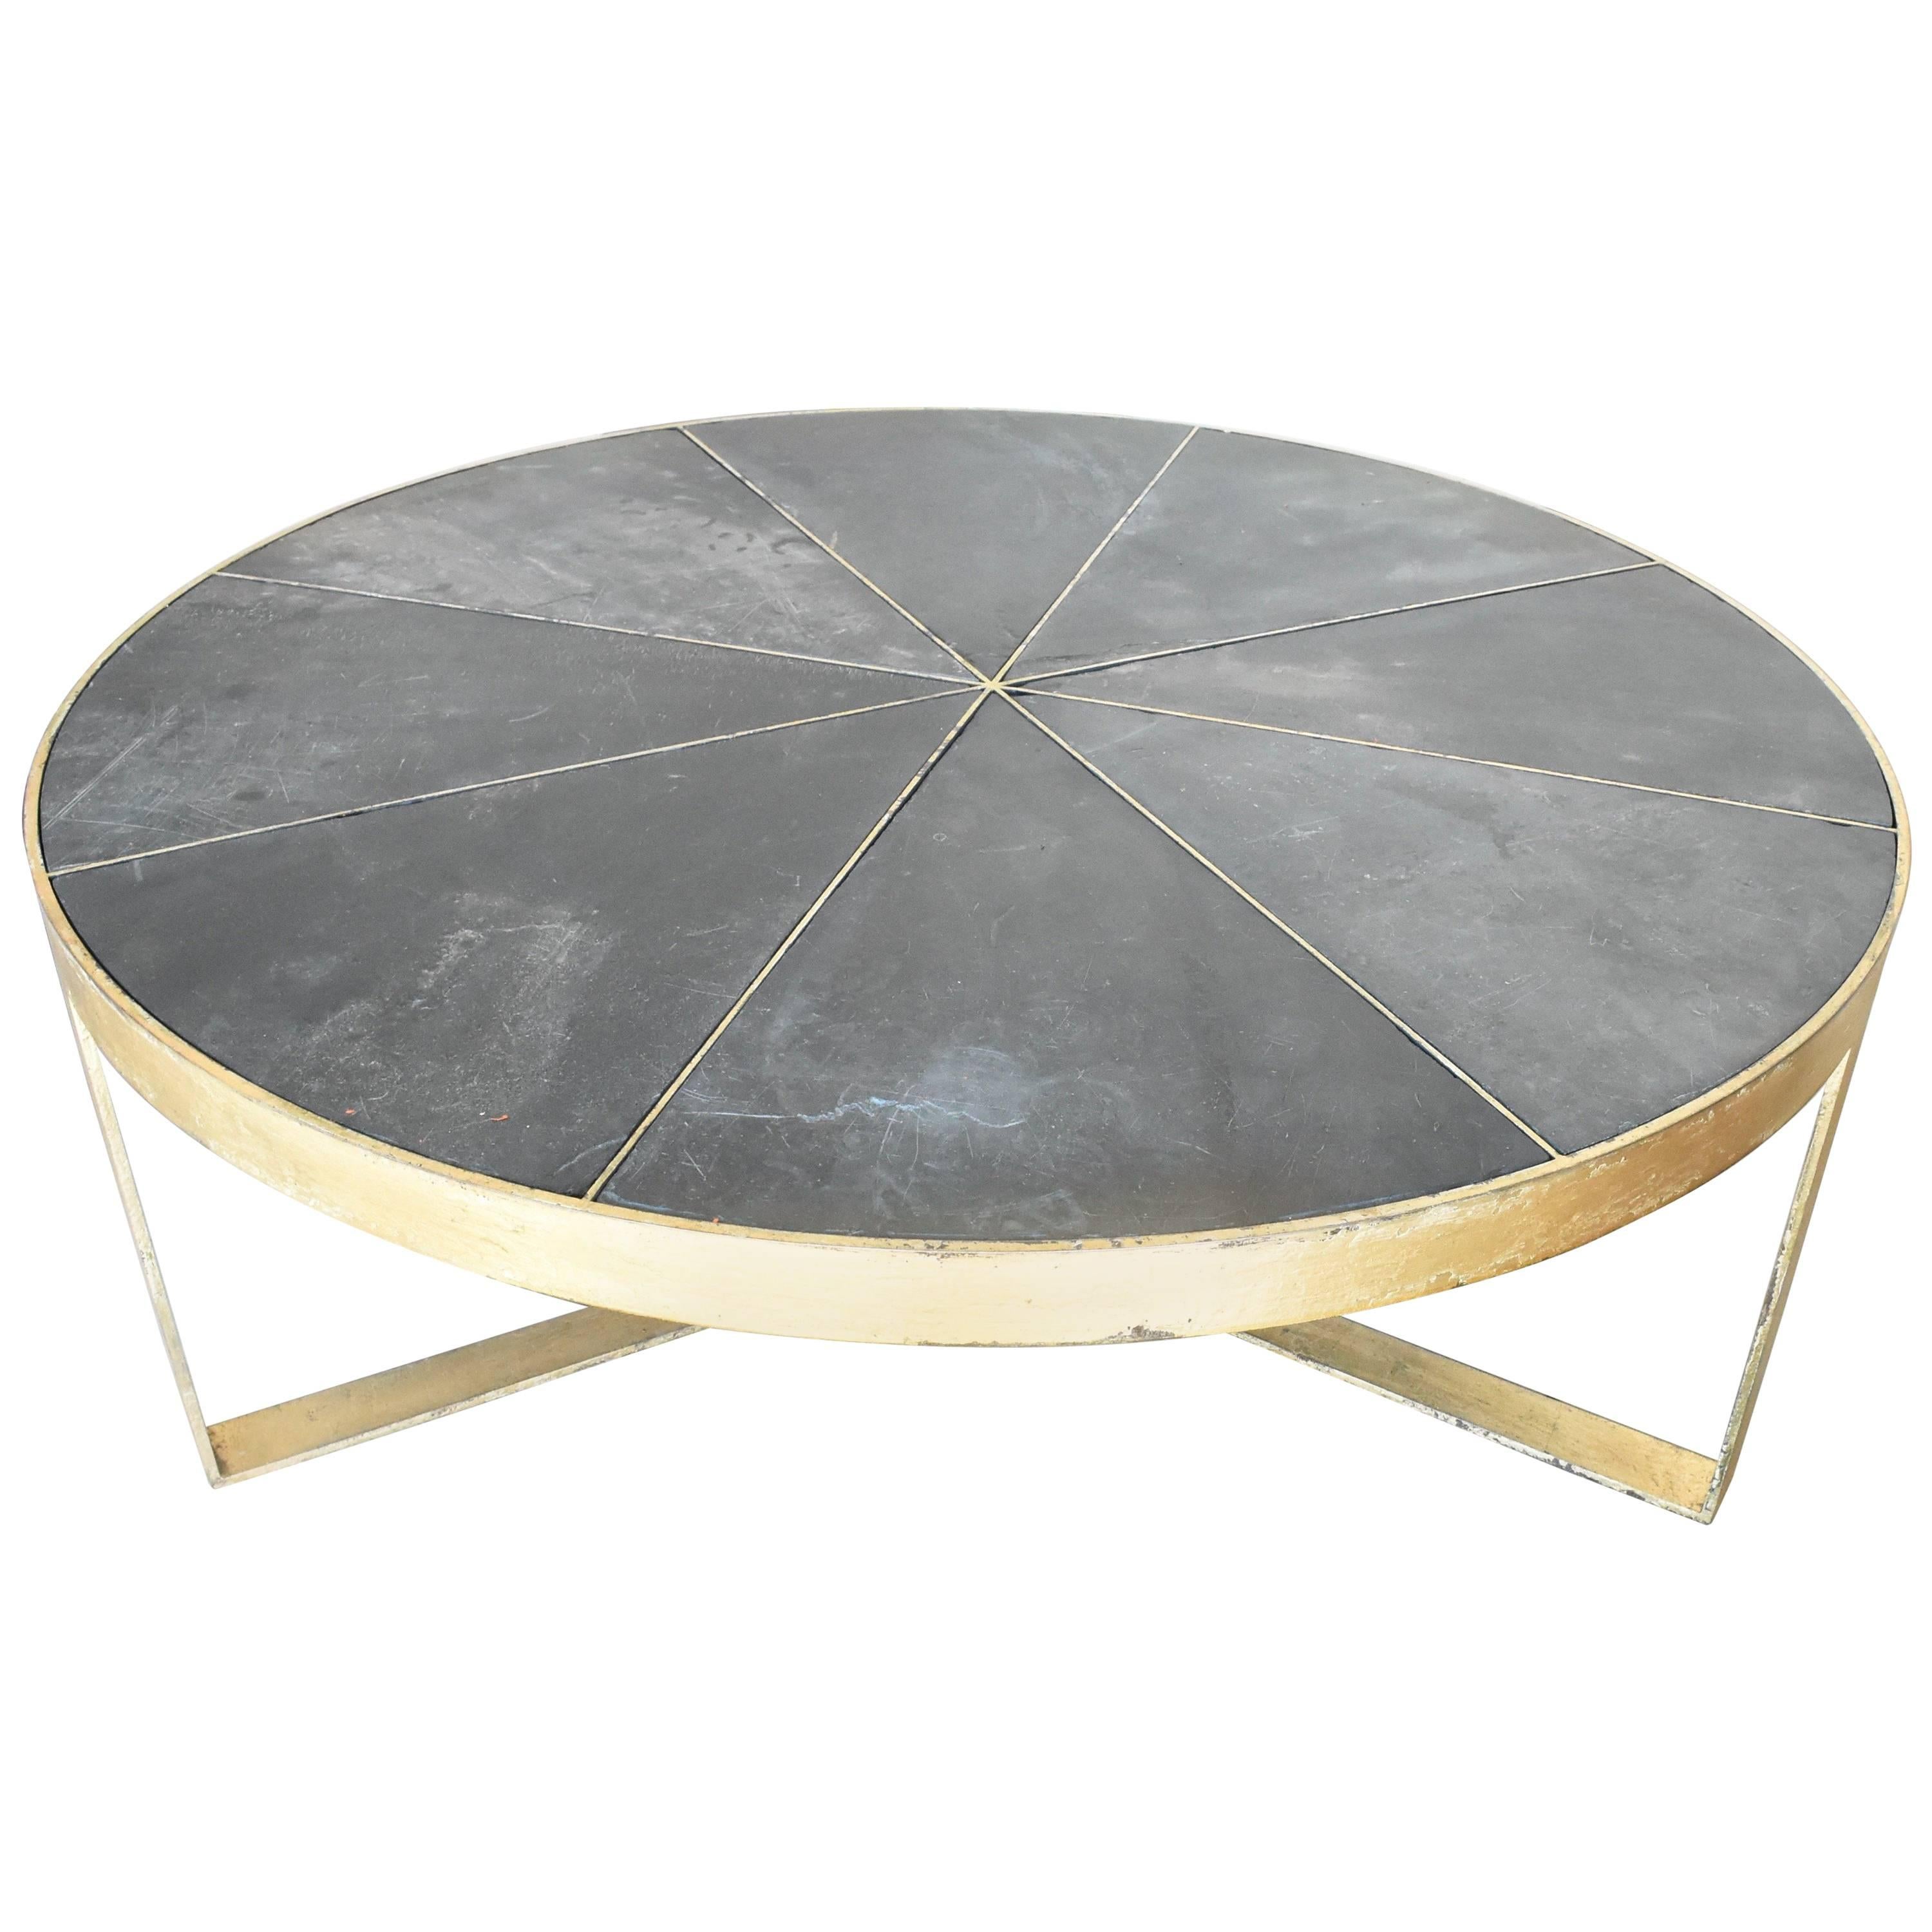 Newly Fabricated Spanish Gold Leaf Over Steel With Slate Inset Coffee Tabletop 